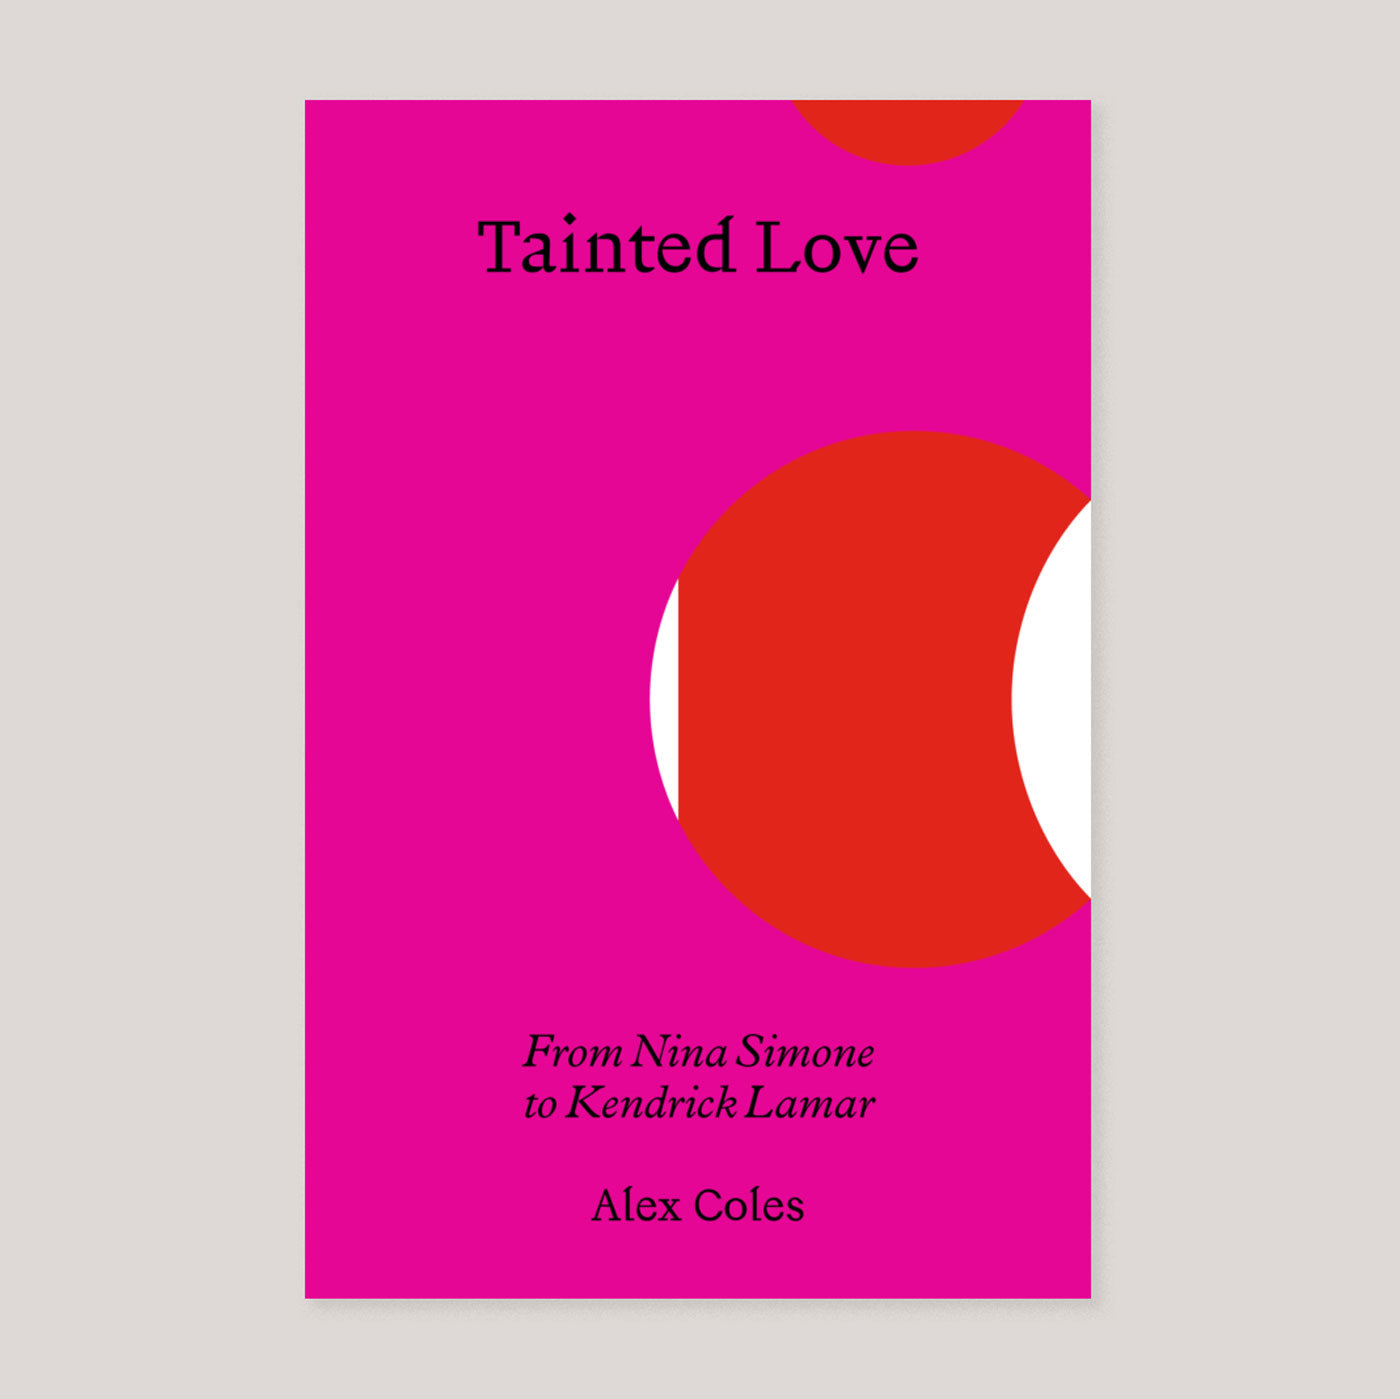 Tainted Love: From Nina Simone to Kendrick Lamar | Alex Coles | Colours May Vary 